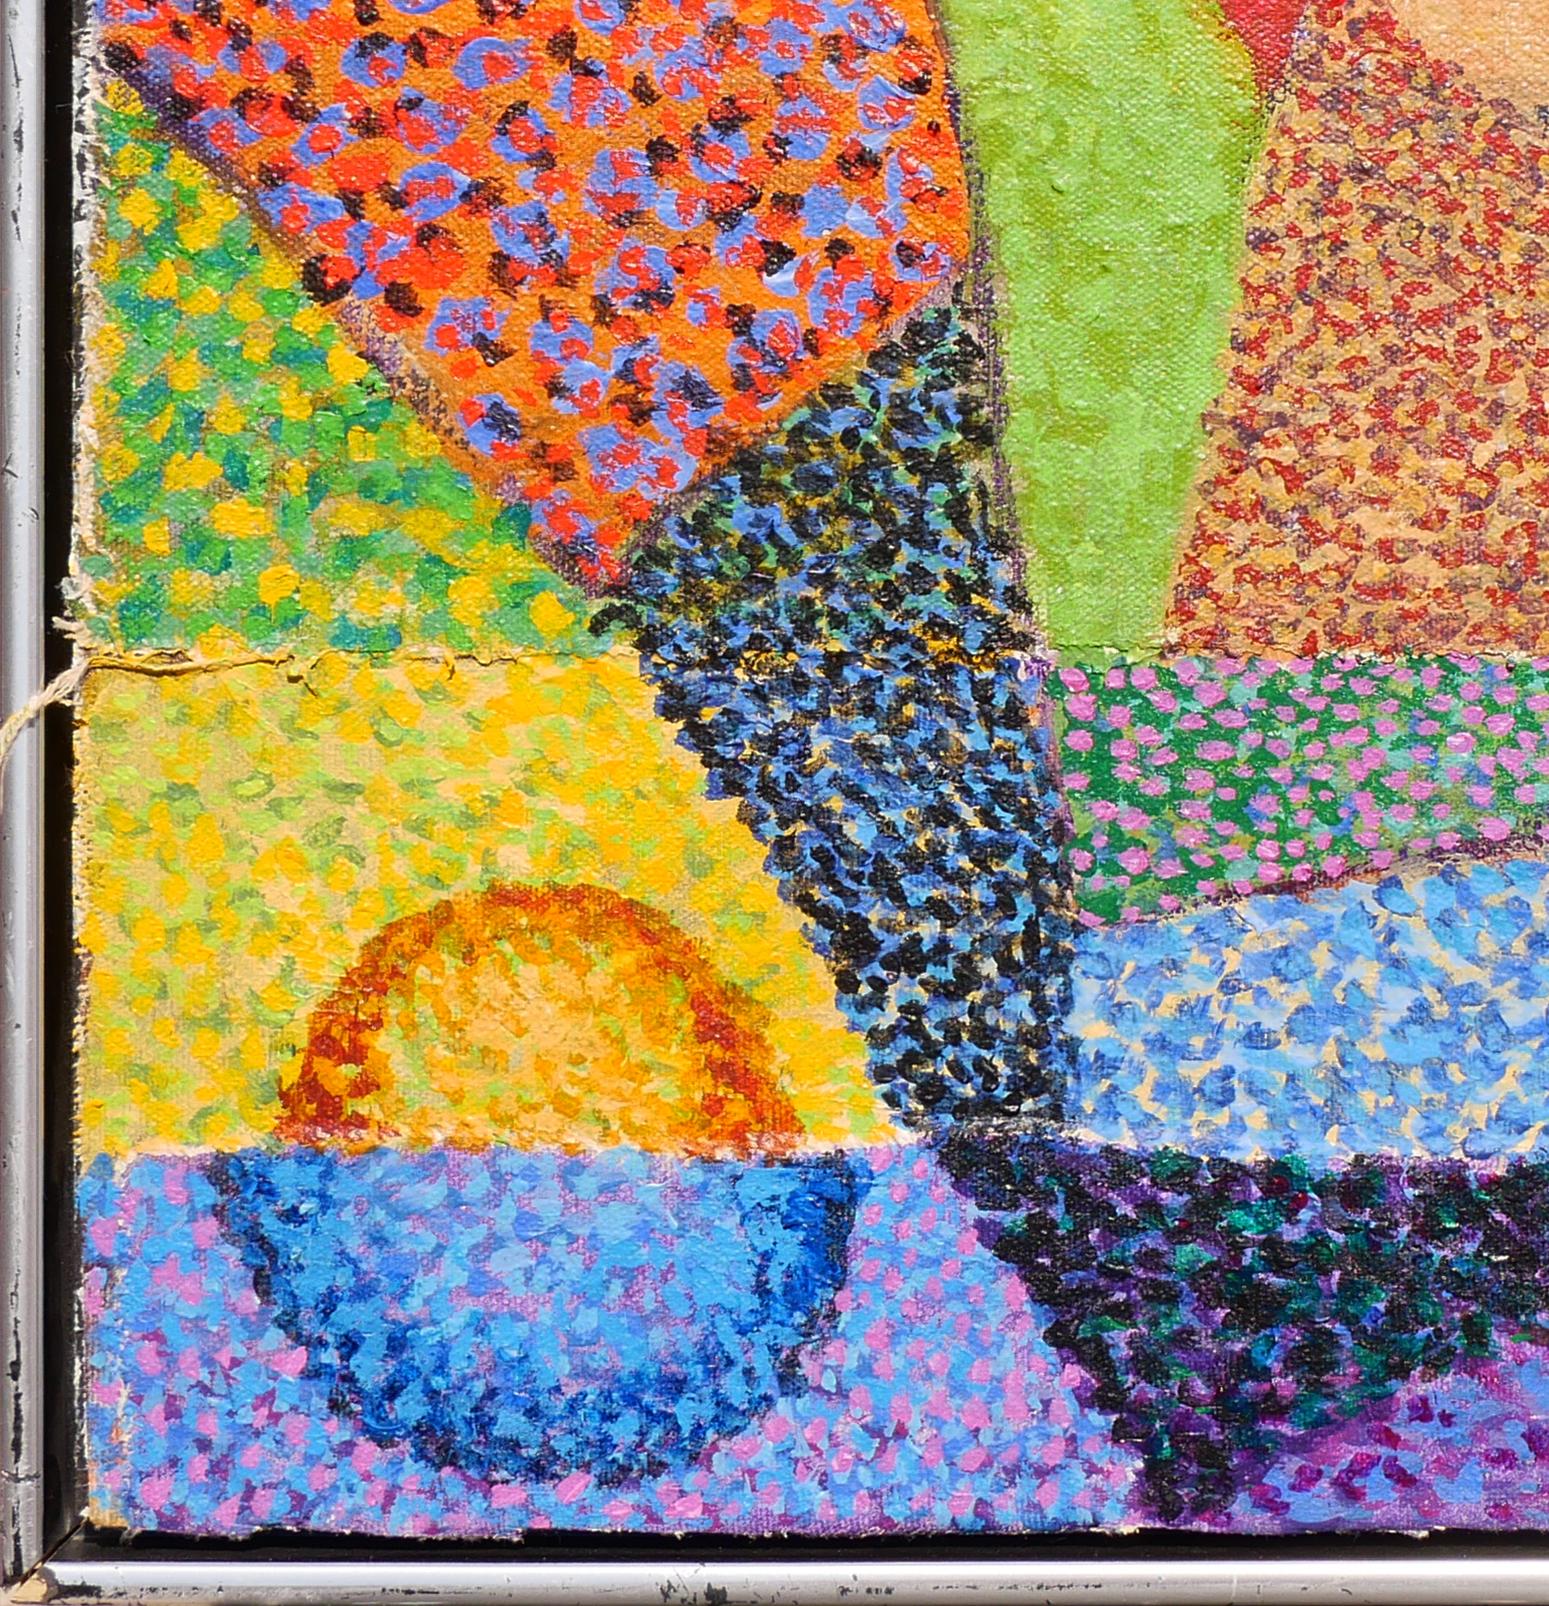 Blue, yellow, red, green, and purple geometric abstract painting by Houston, TX artist Earl Staley. The painting features geometric shapes that resemble a landscape altogether. The colors appear blended through a pointillism technique. Upon looking